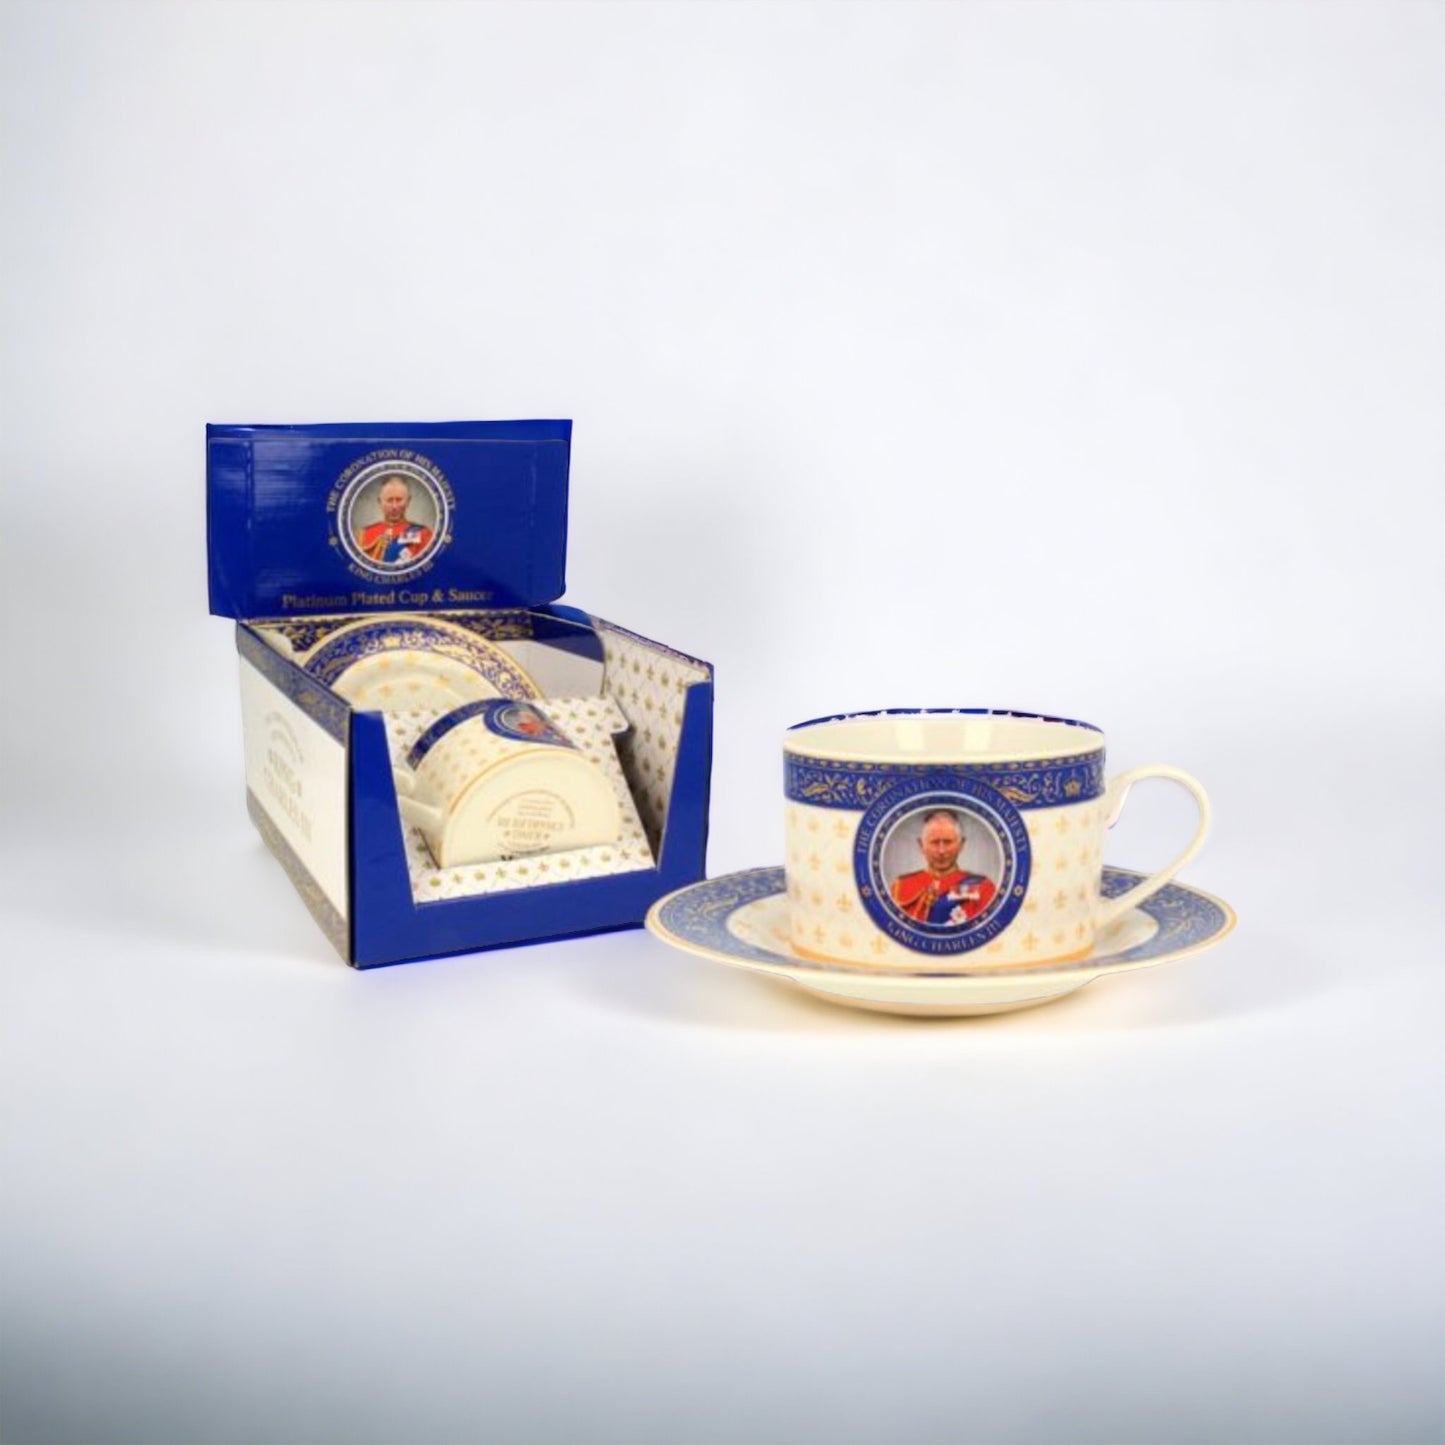 The HM King Charles III Coronation Collection - Cup and Saucer